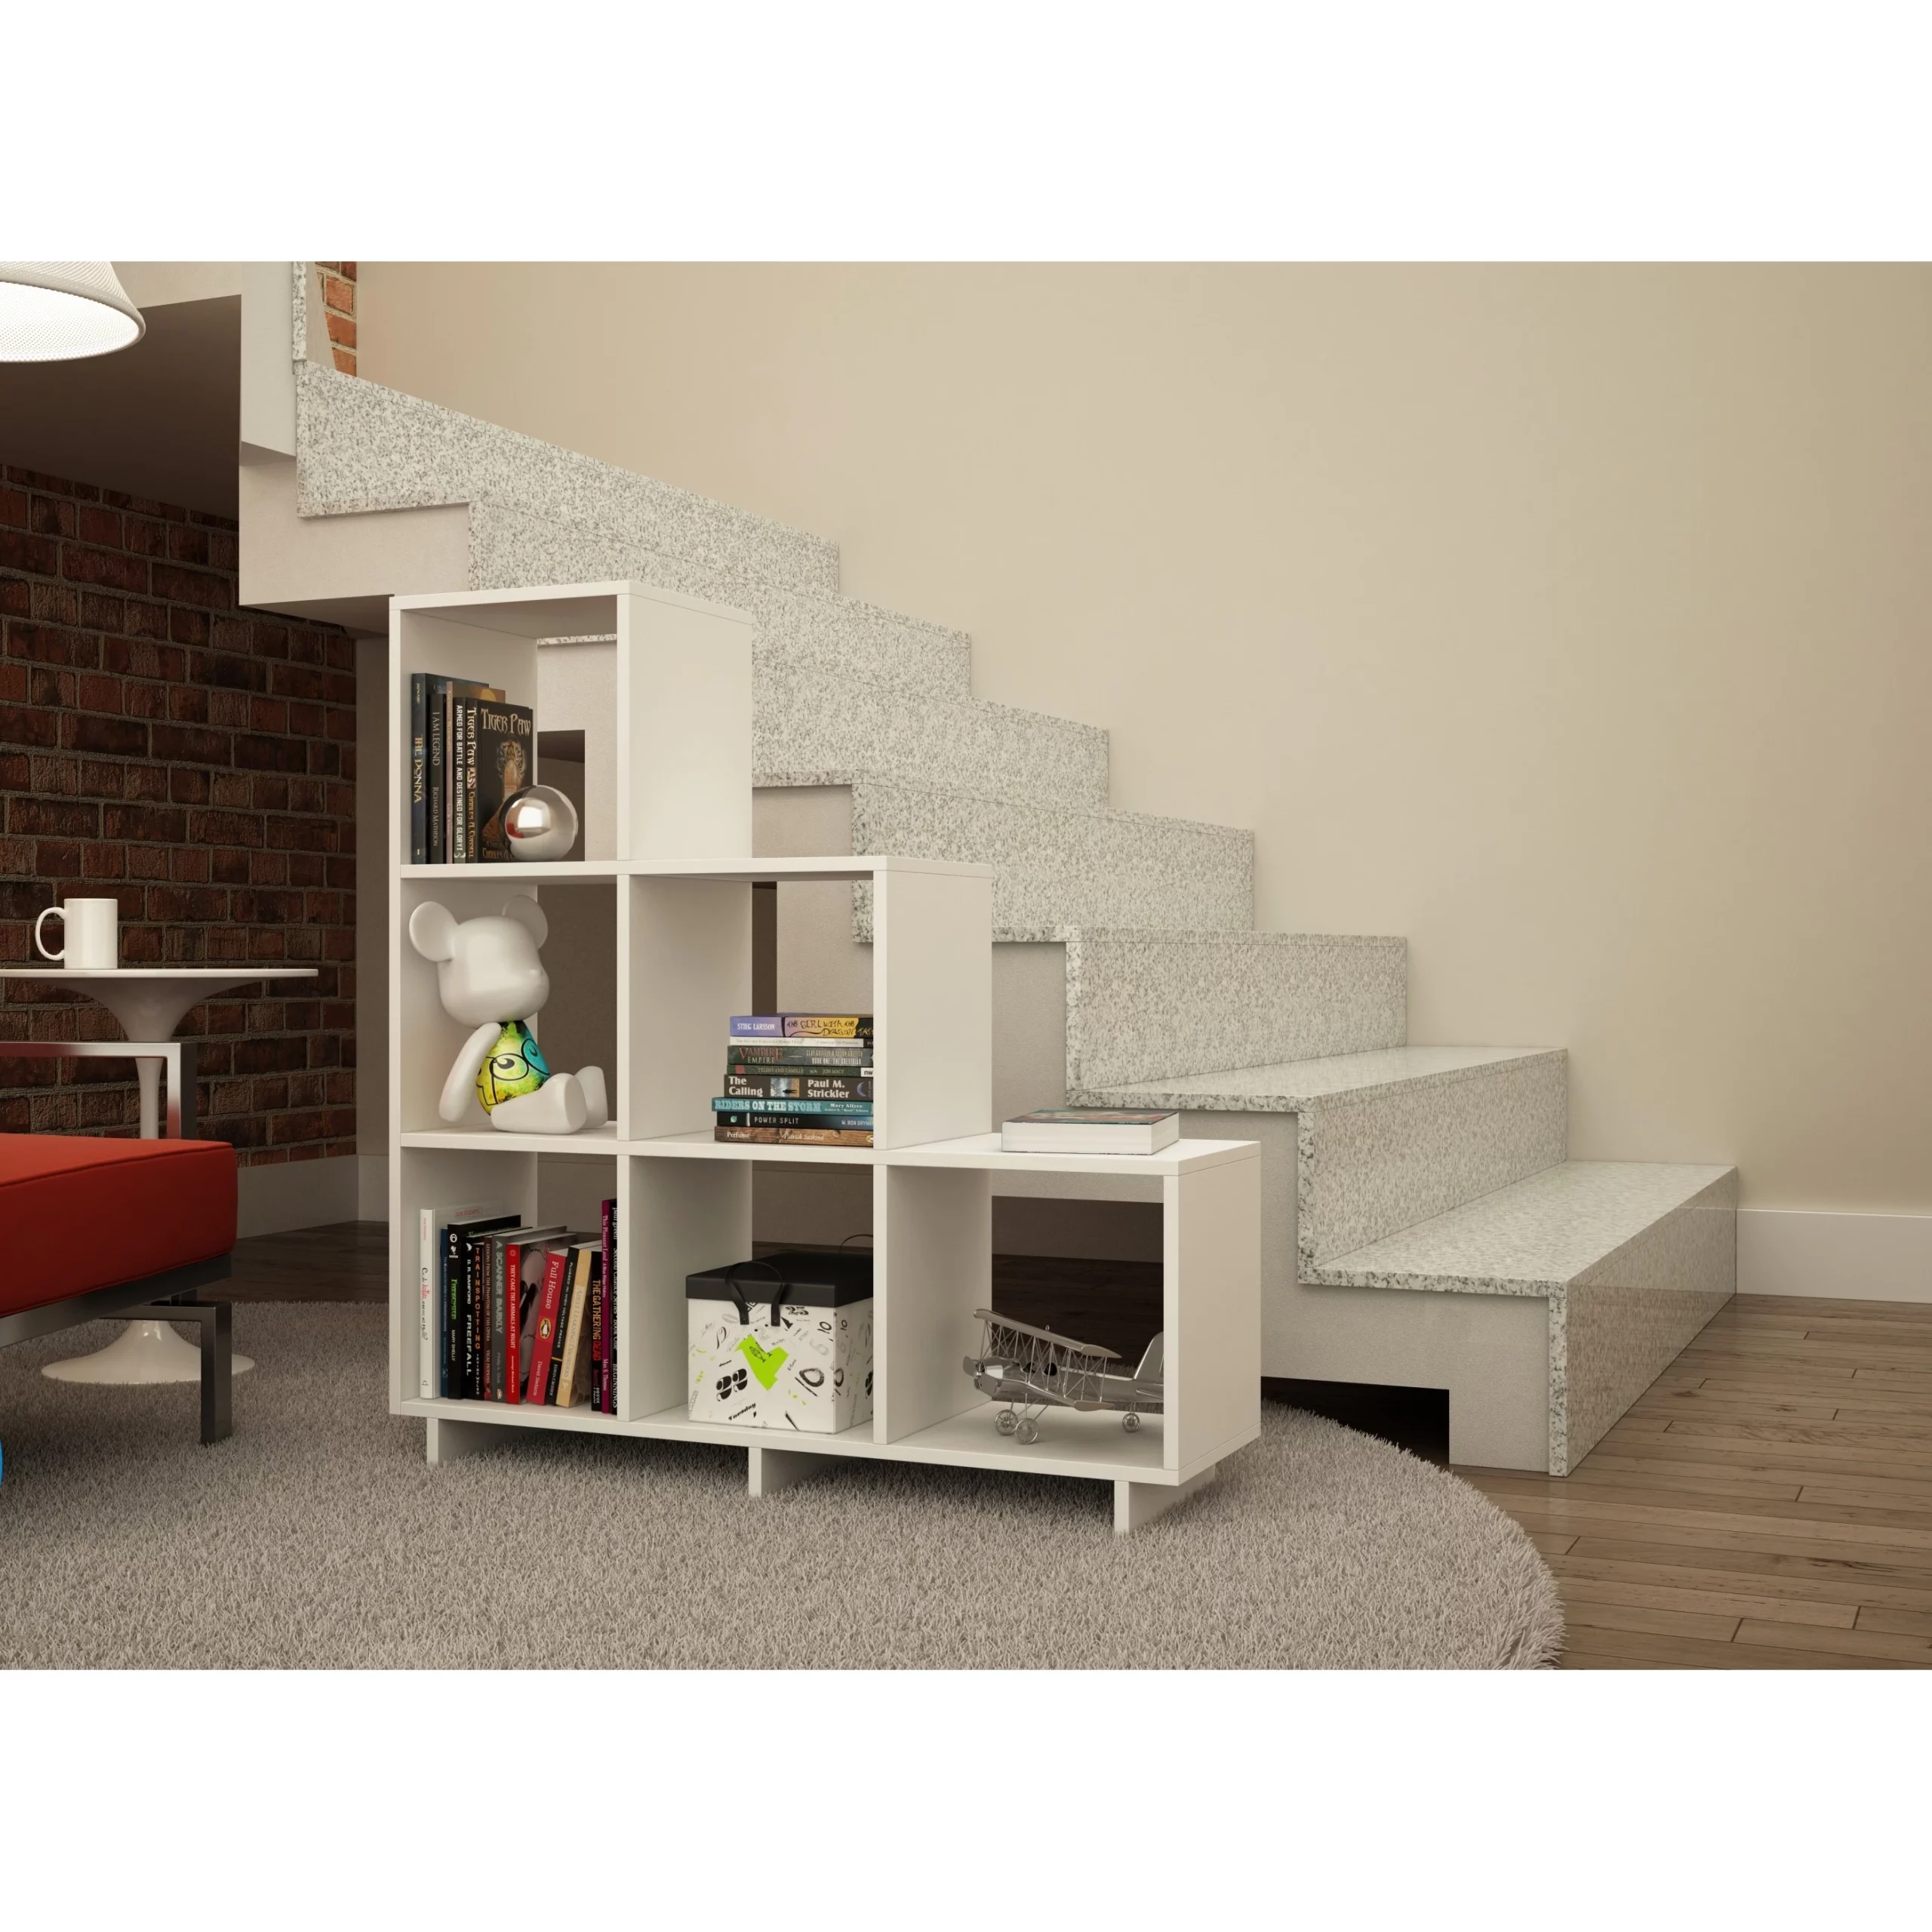 Make Use of Awkward Space with a Stair Cubby